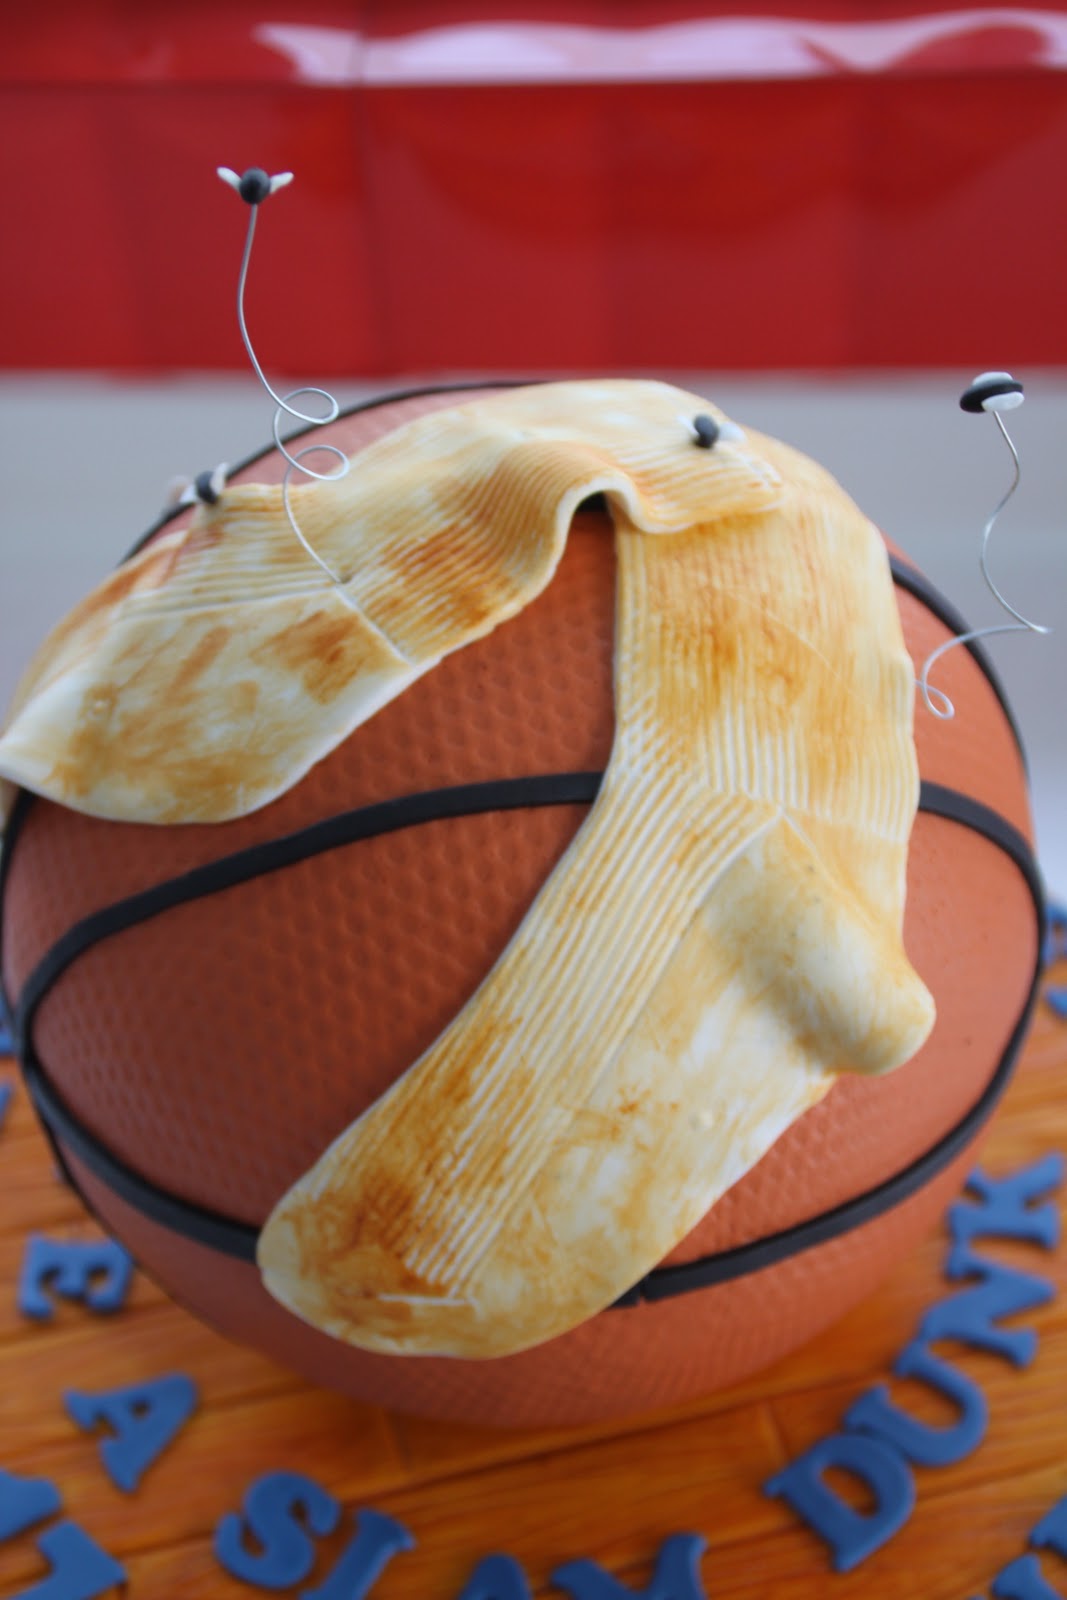 Sculpted Basketball Cake With Socks 